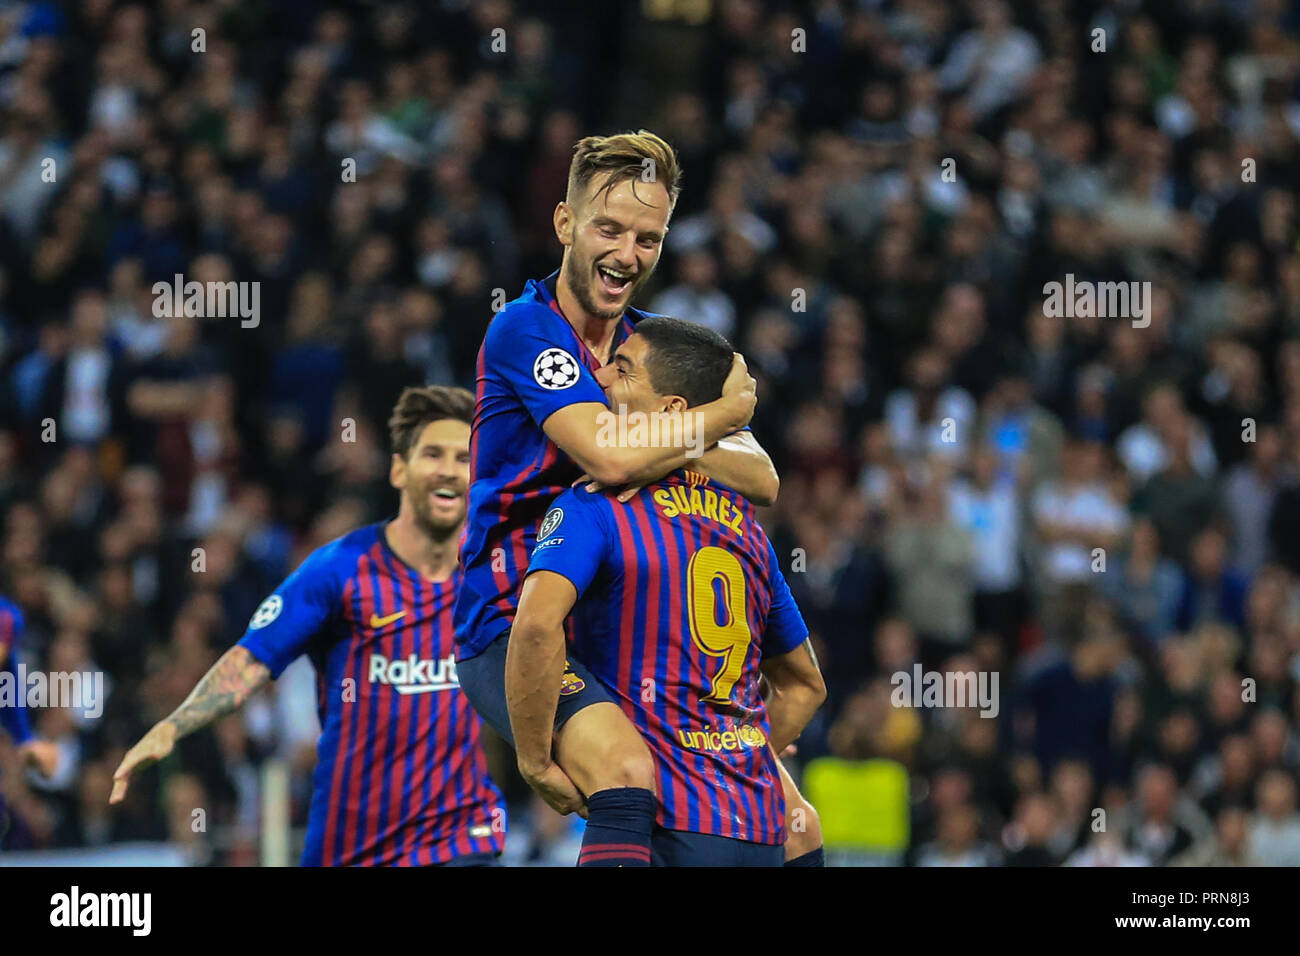 Page 2 - Barcelona Celebrates His Goal High Resolution Stock Photography  and Images - Alamy